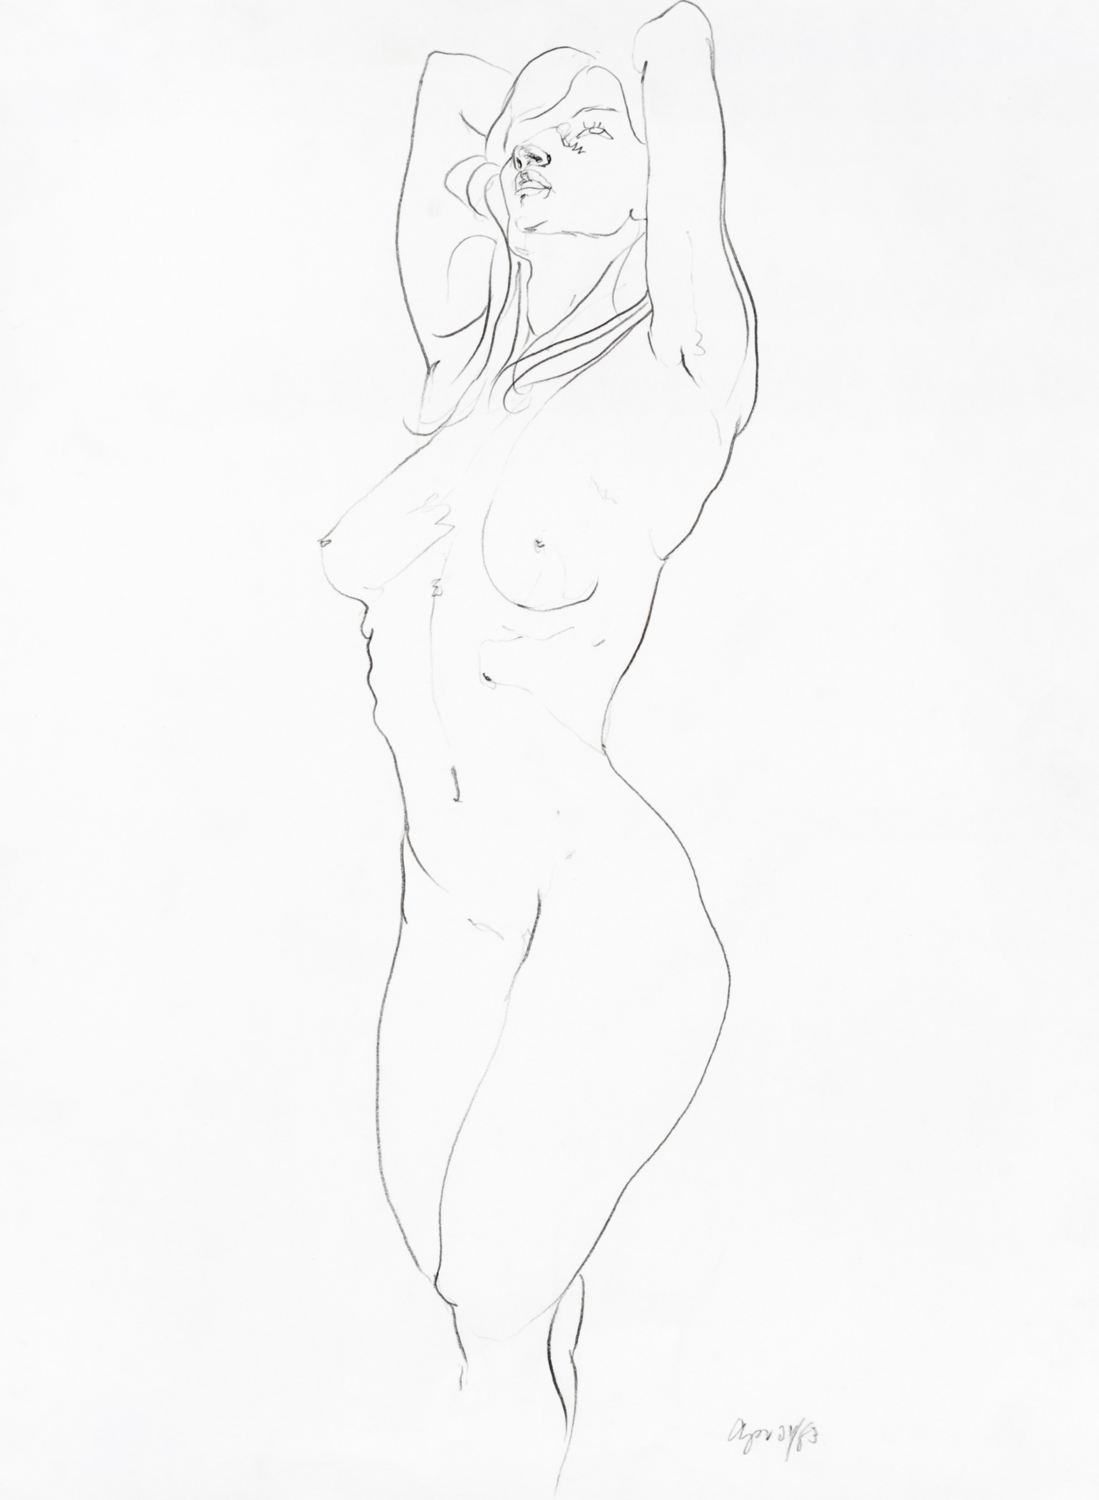 (life drawing – standing nude with hands on back of head)